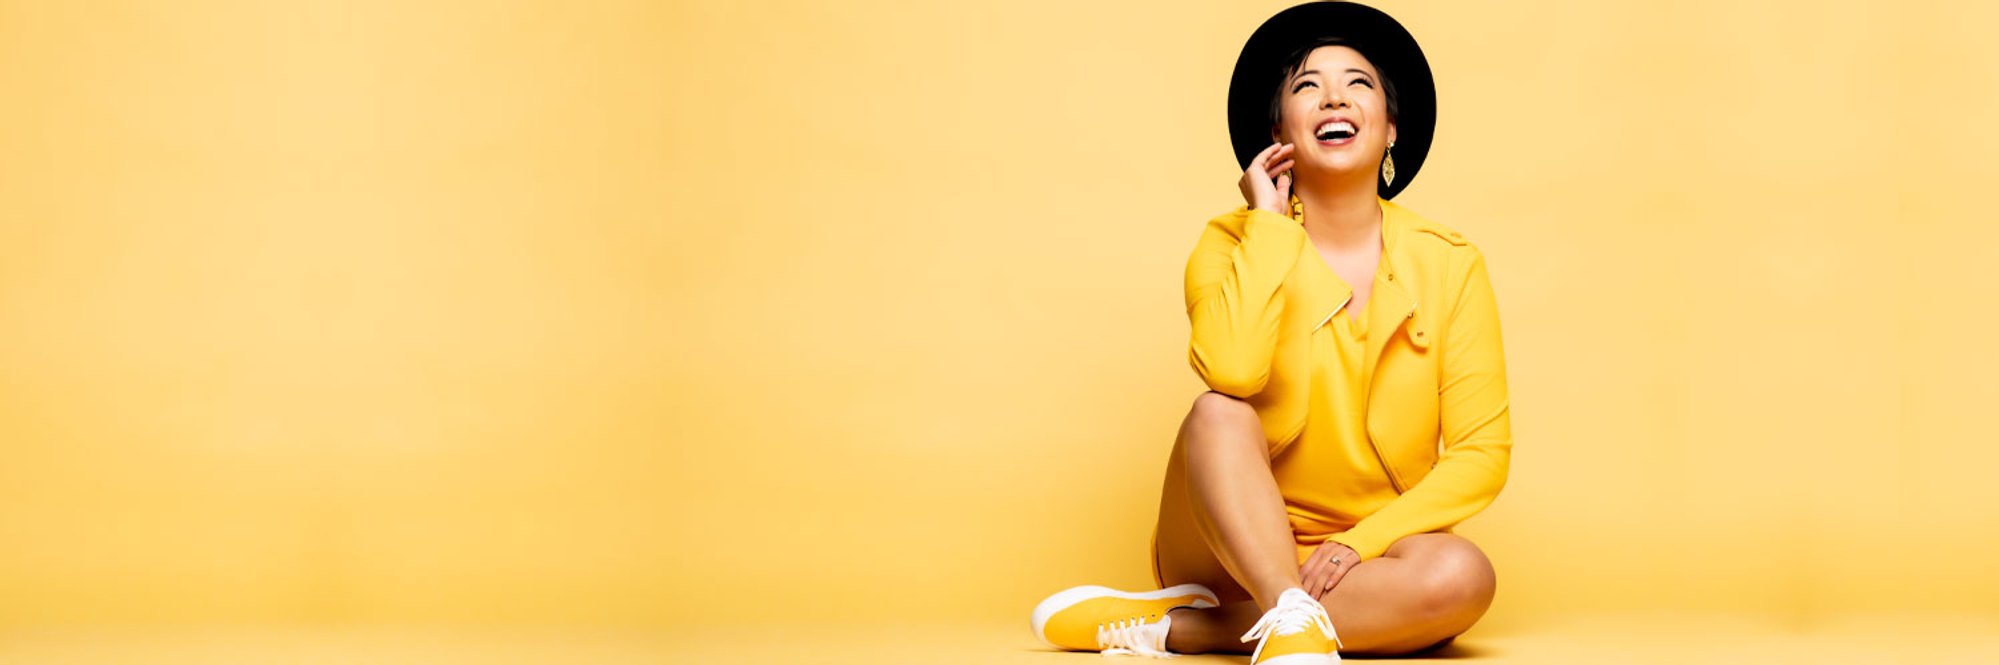 An Asian woman wearing a yellow jacket, yellow shirt, yellow shorts, and yellow shoes and a black hat sits on a yellow background and laughs uptowards the ceiling